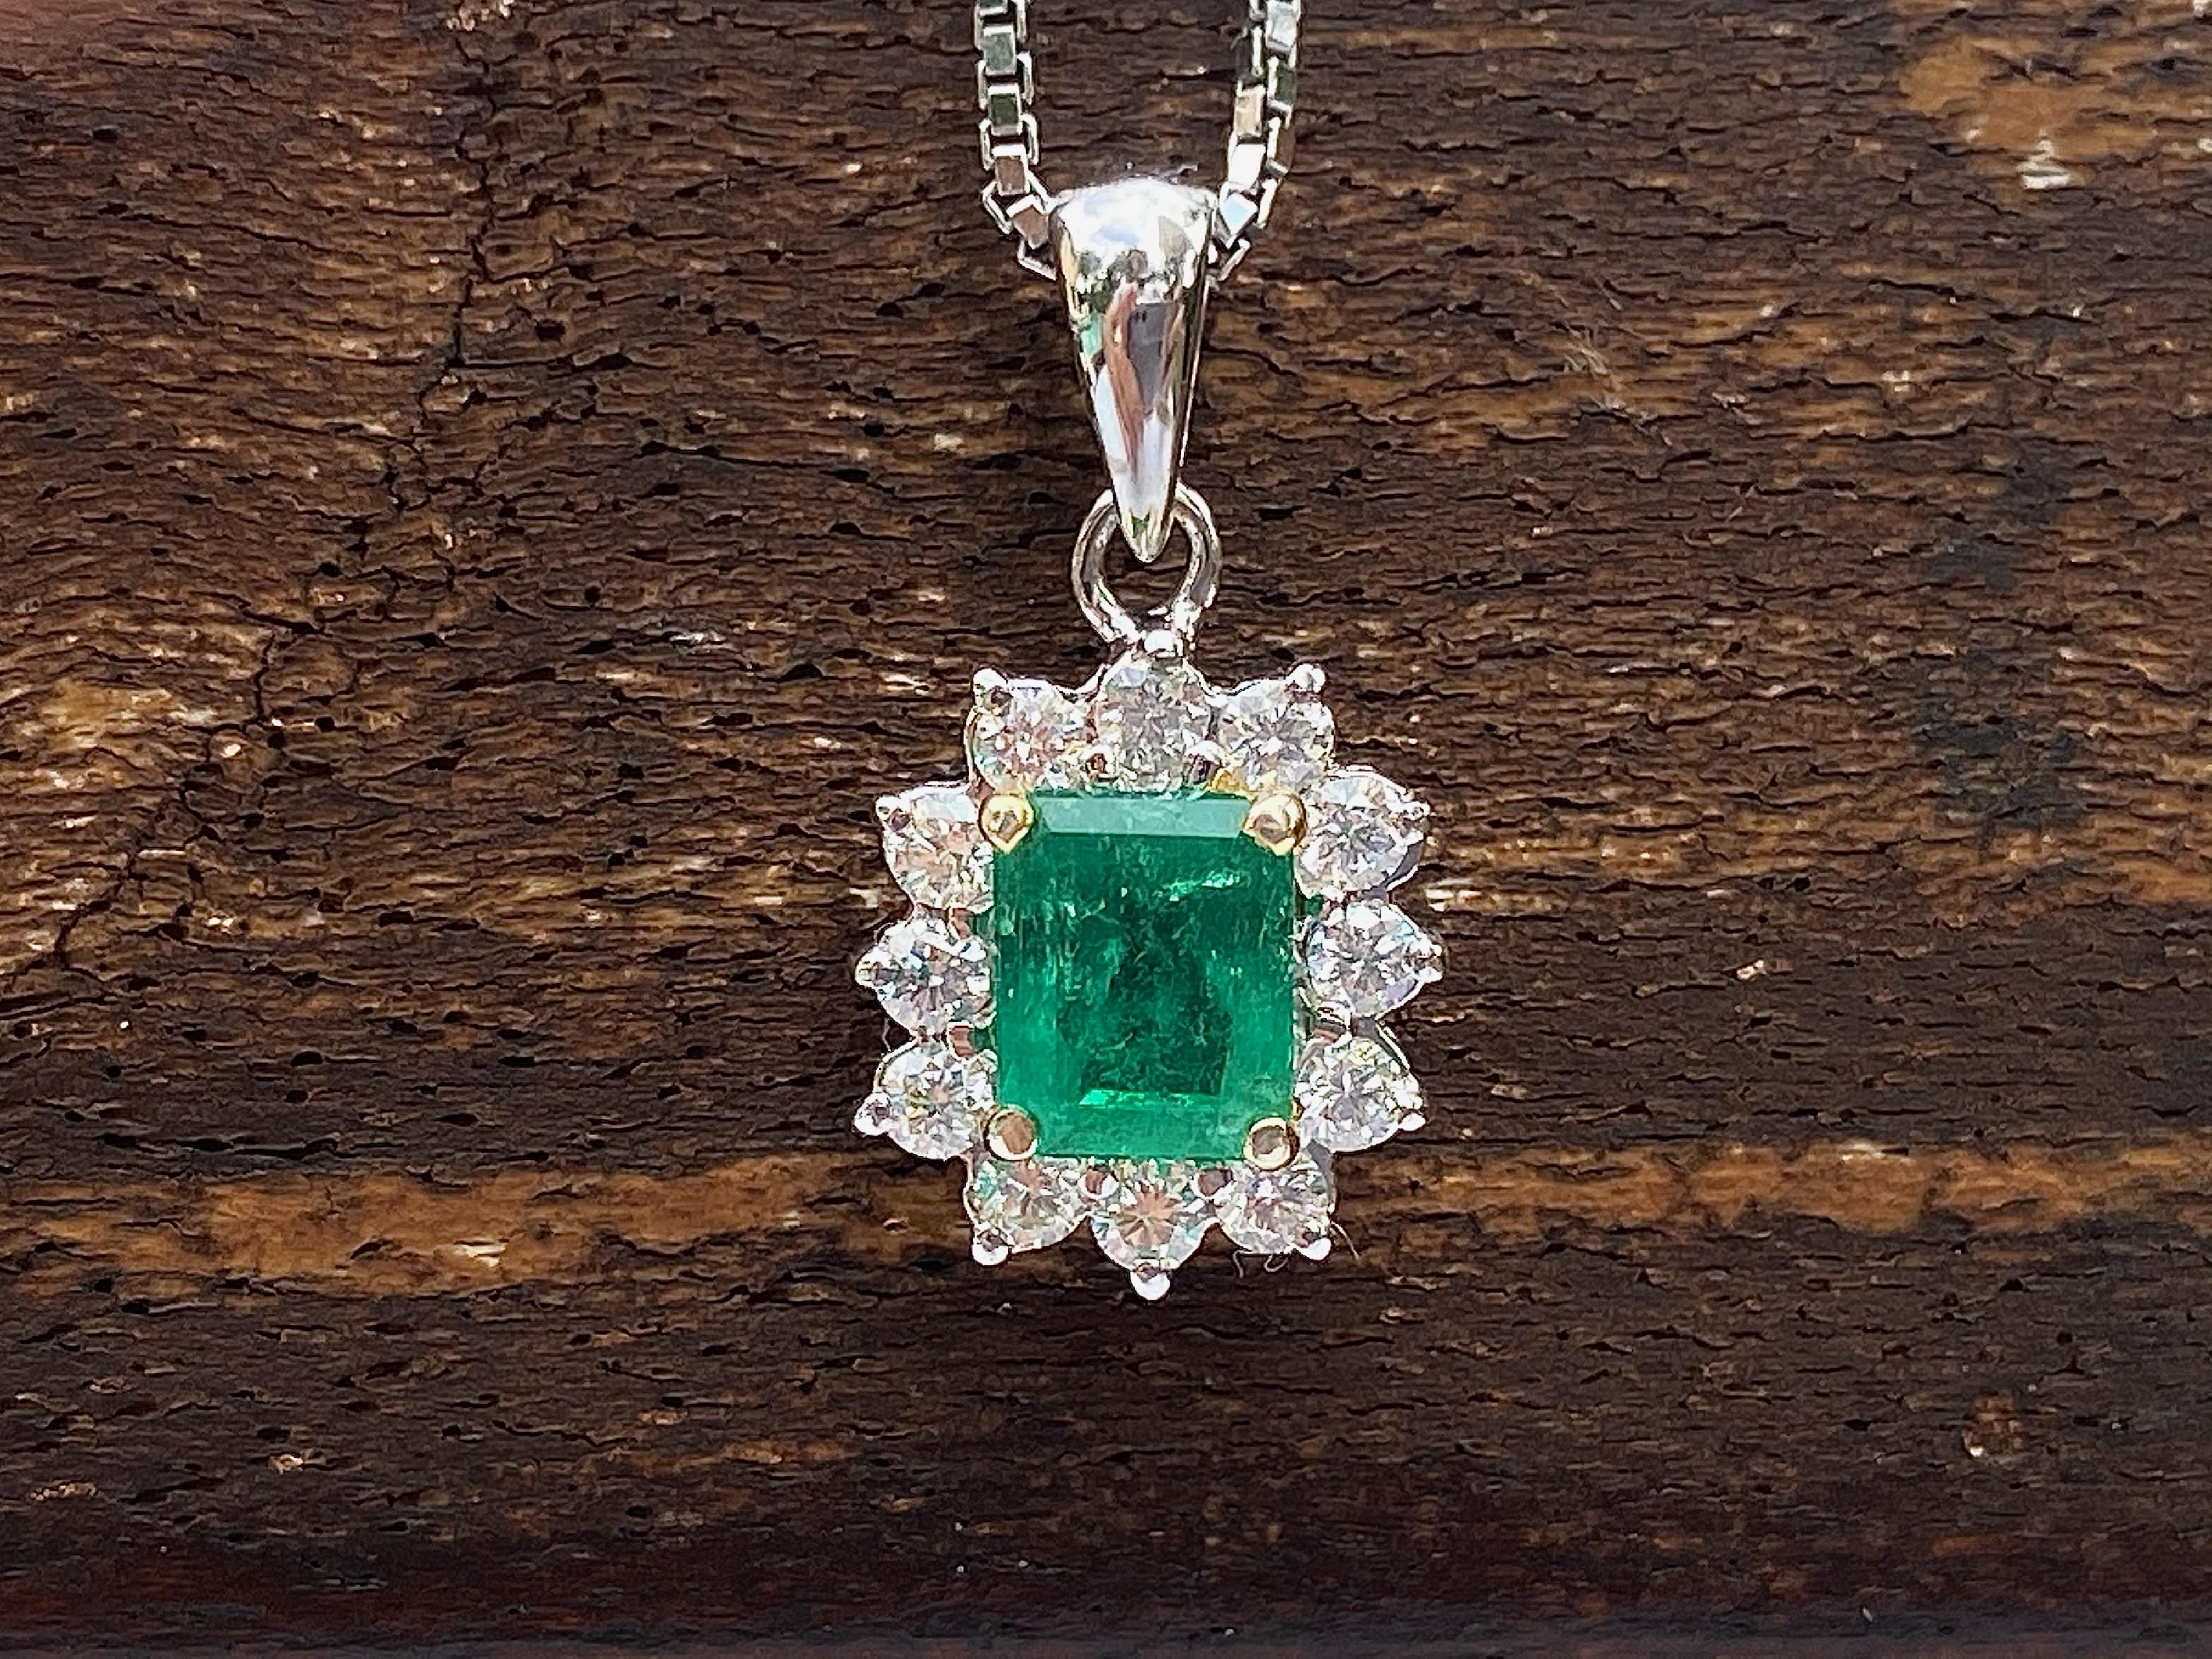 Centering a 0.46 Carat Emerald-Cut Colombian Emerald, accented by 12 Round-Brilliant Cut Diamonds totaling 0.22 Carats, and set in 18K White Gold.
Natural Emerald pendant of Colombian origin. Emerald step cut center stone for optimal brilliance and